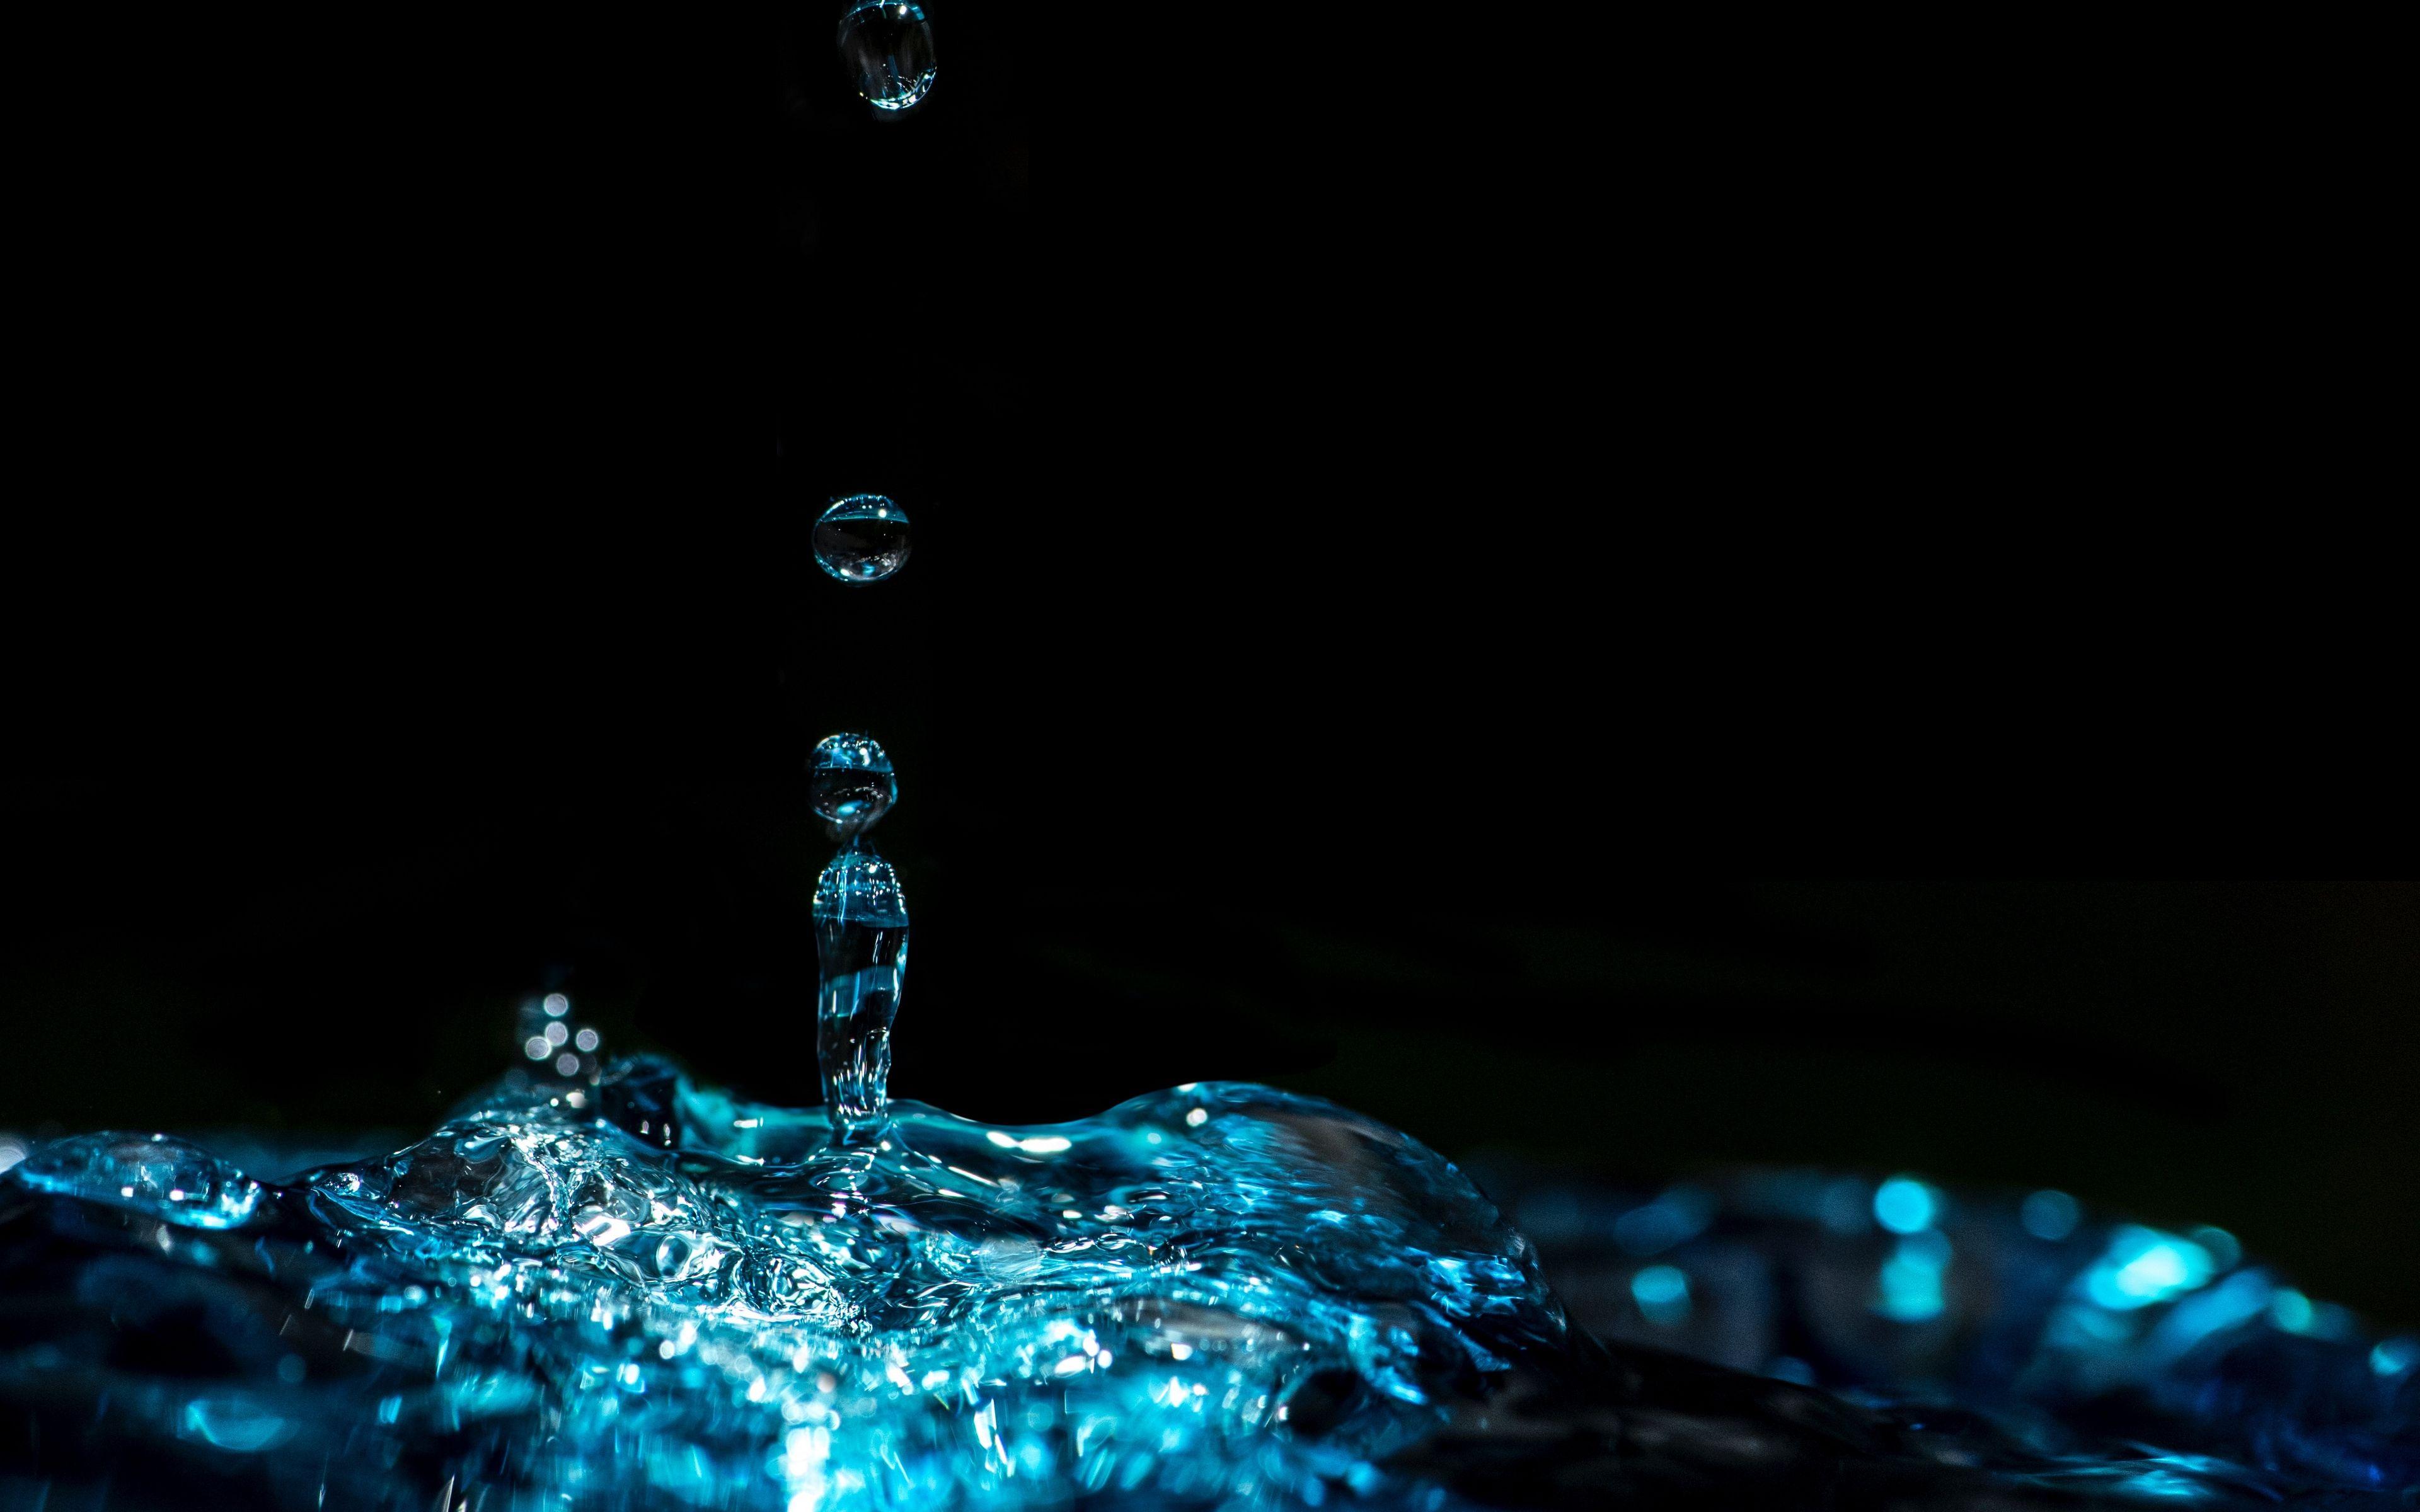 Water full hd, hdtv, fhd, 1080p wallpapers hd, desktop backgrounds  1920x1080, images and pictures